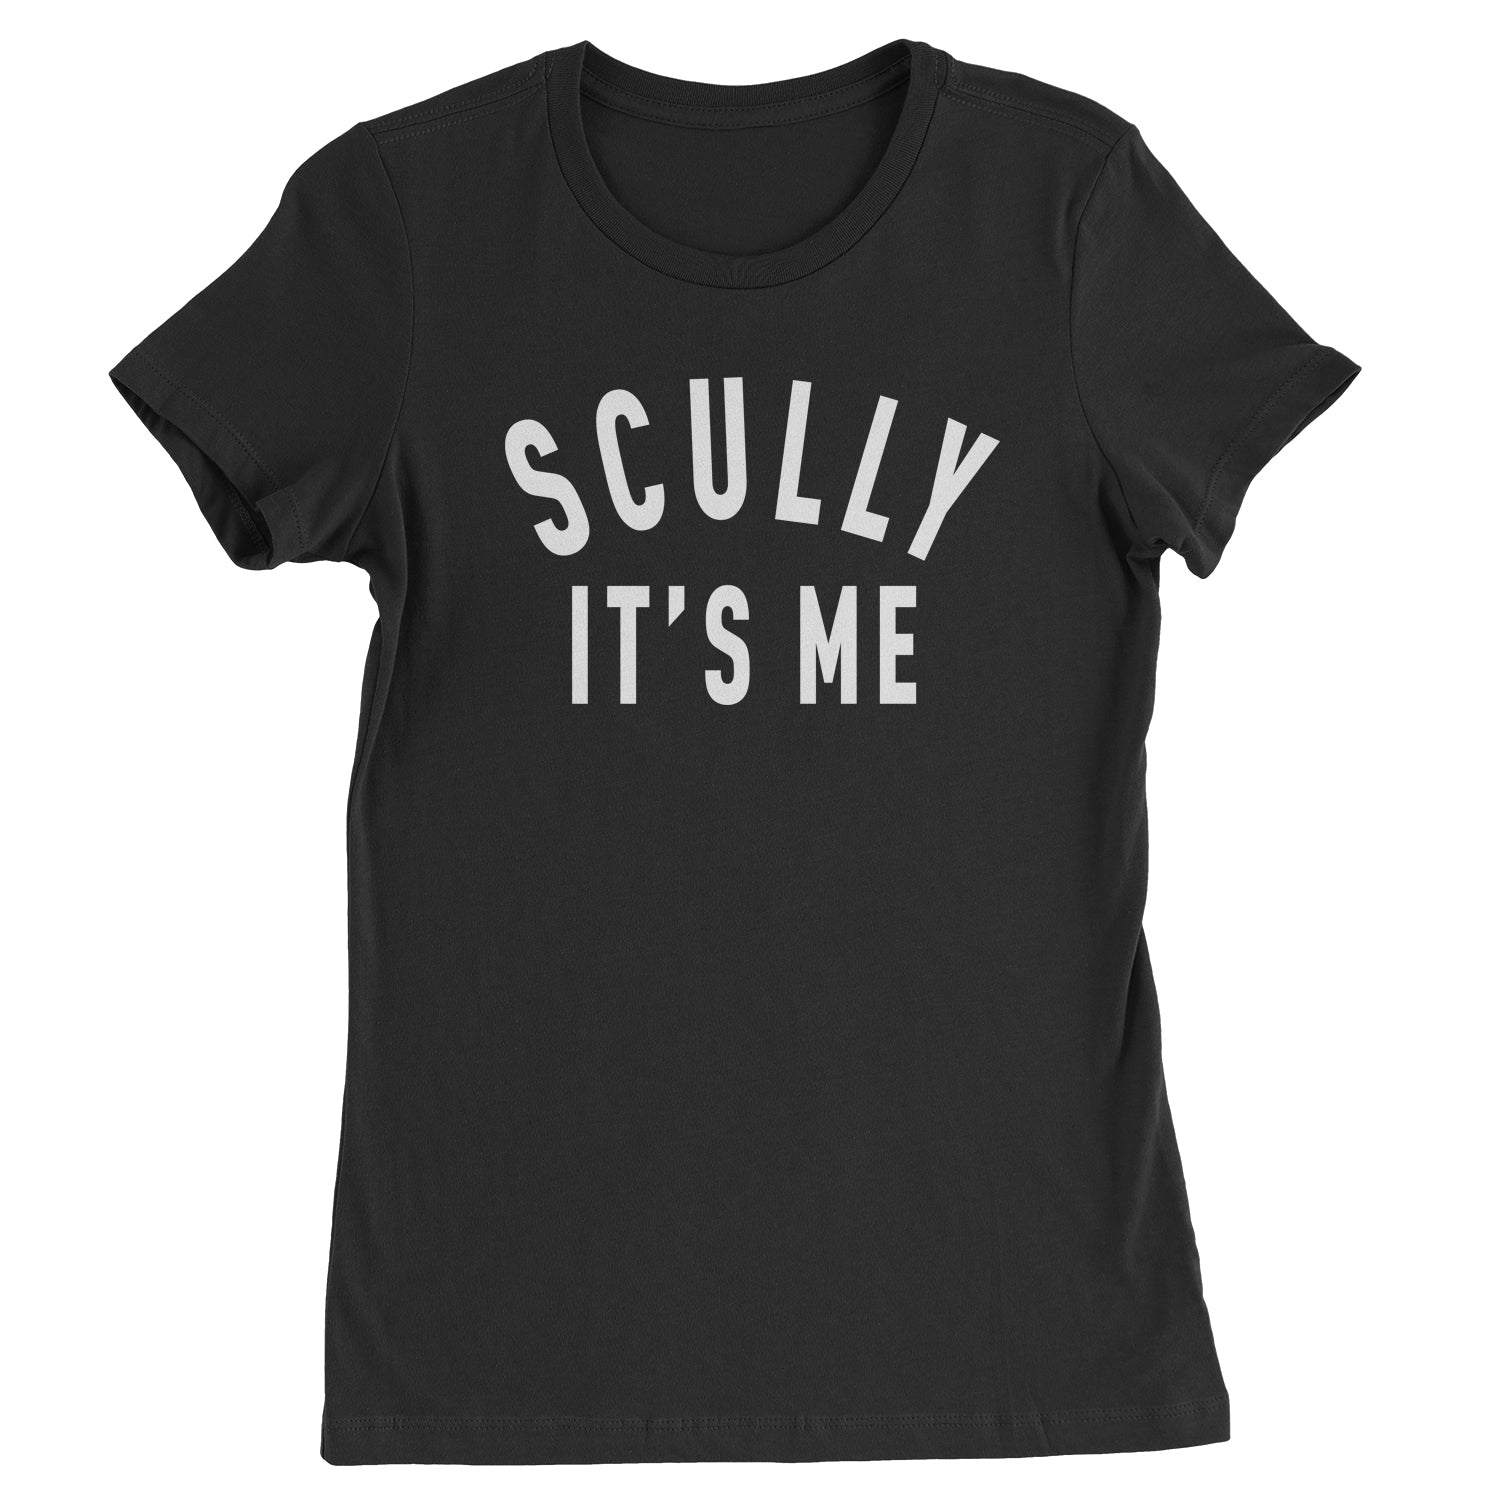 Scully, It's Me Womens T-shirt #expressiontees by Expression Tees